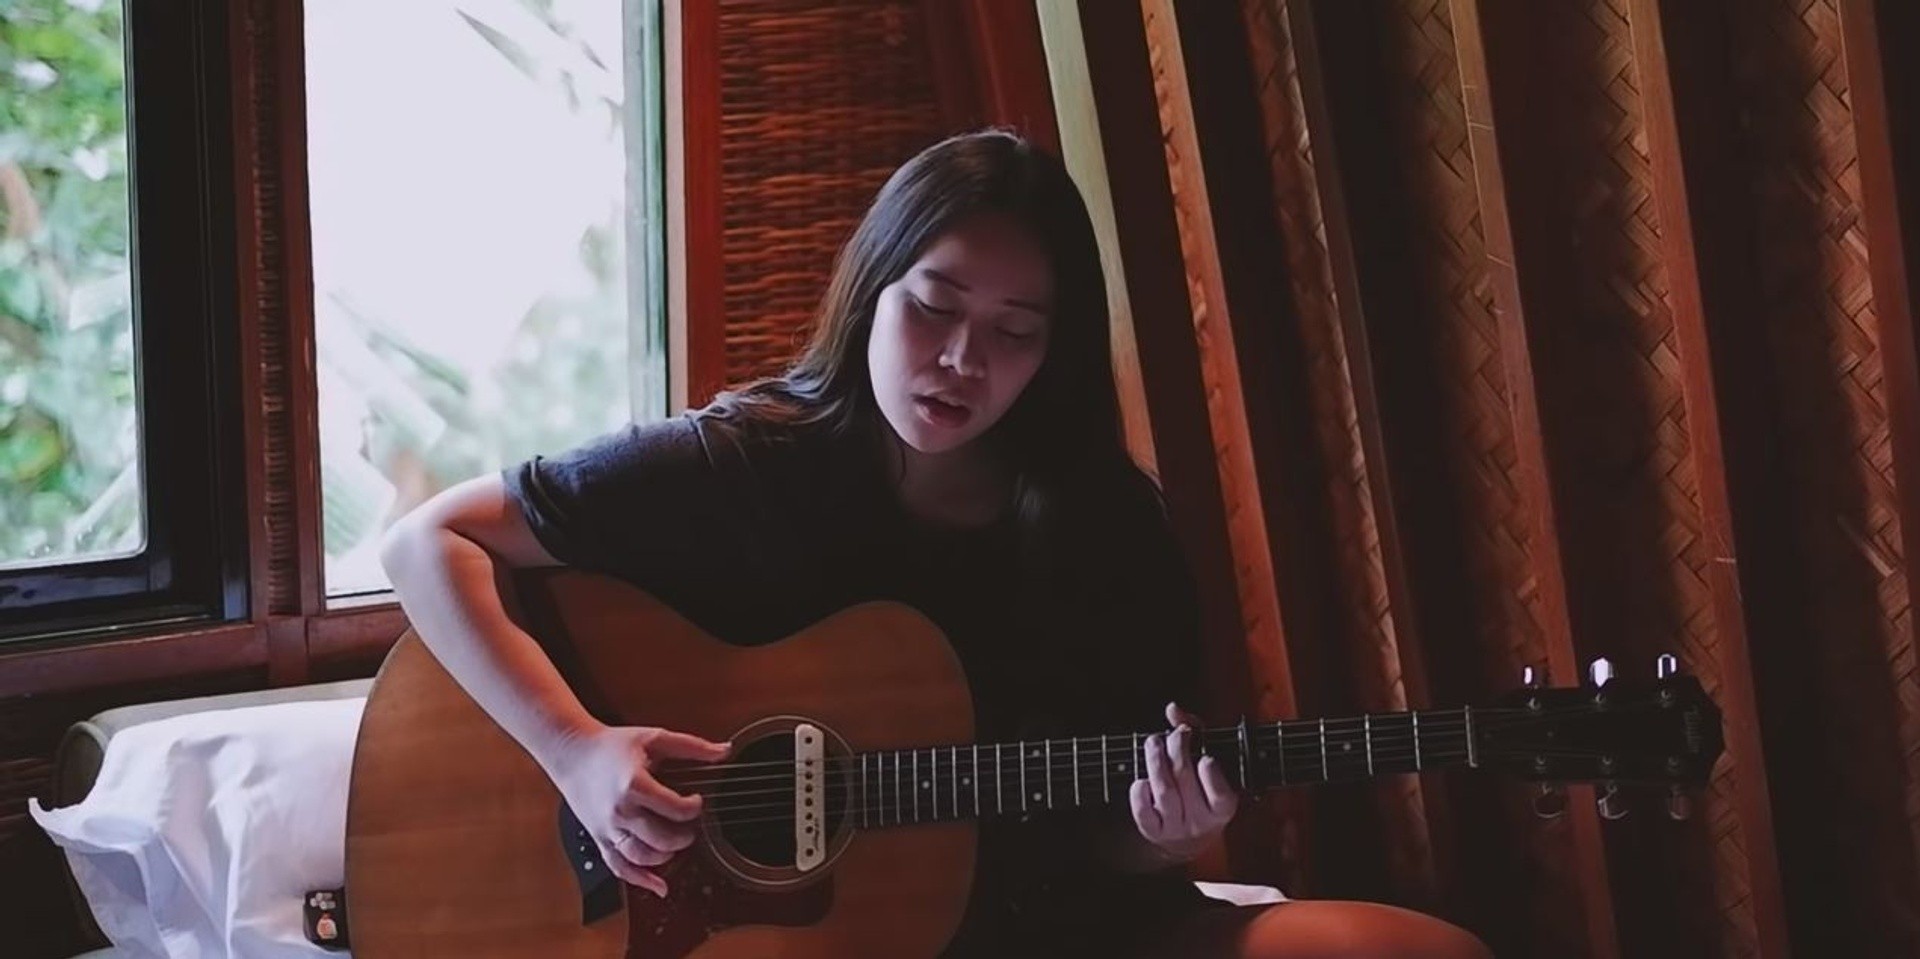 Reese Lansangan shares acoustic cover of Sarah McLachlan's 'Angel' – watch